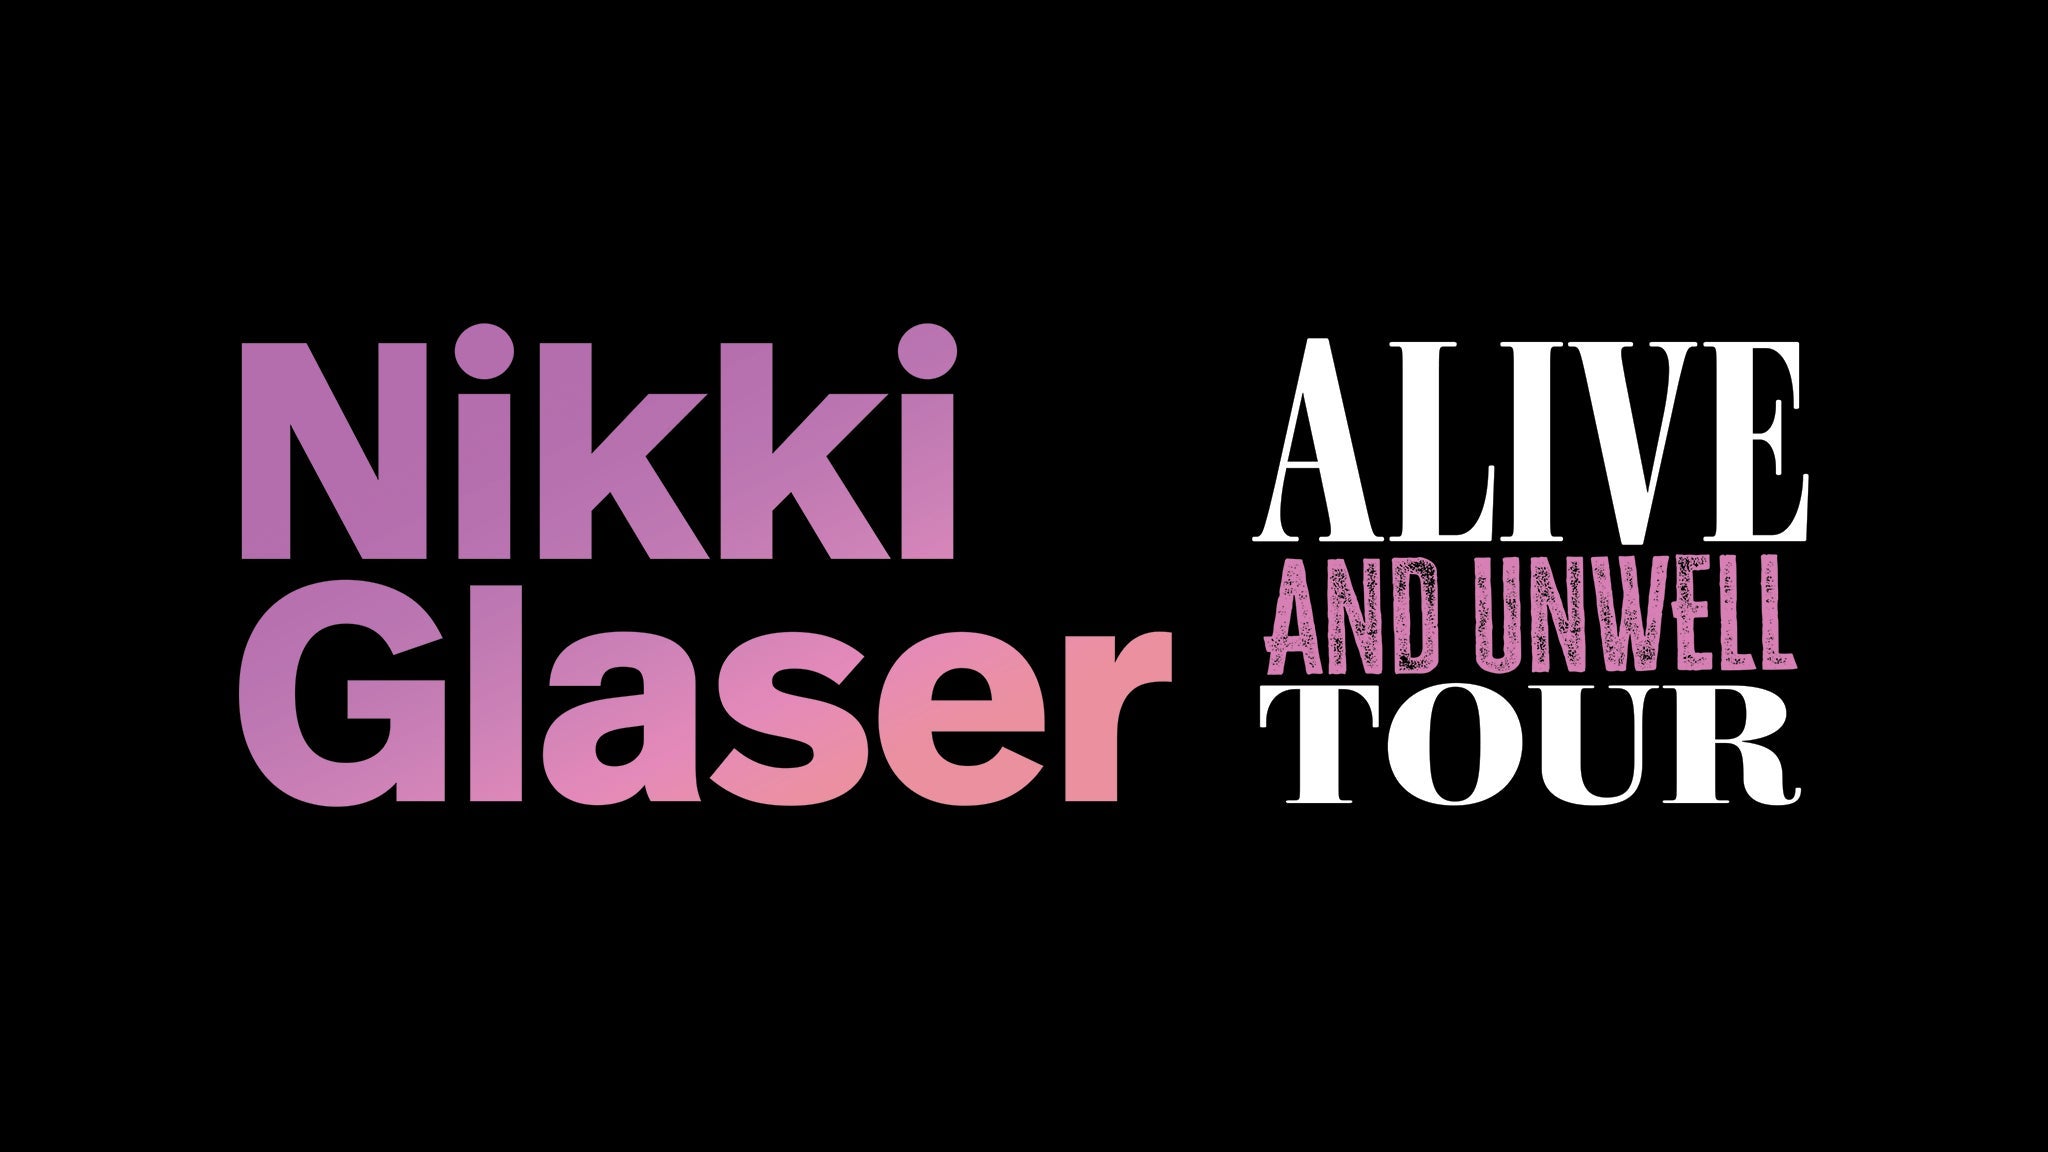 Nikki Glaser: Alive And Unwell Tour